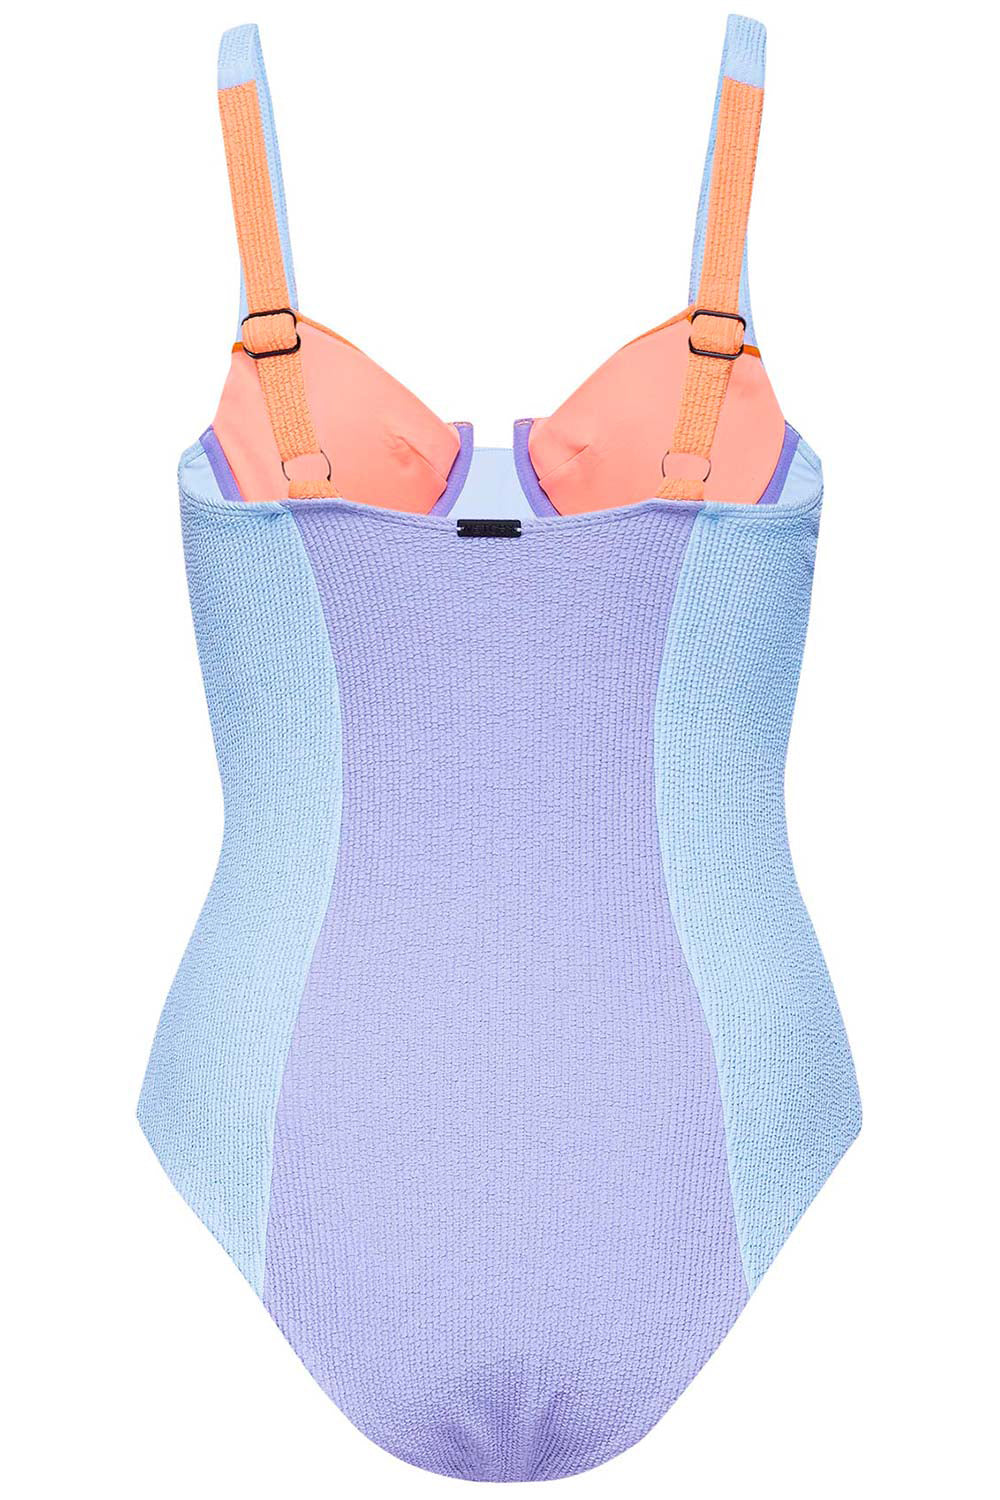 Carmel Underwire Candy Swimsuit – VETCHY